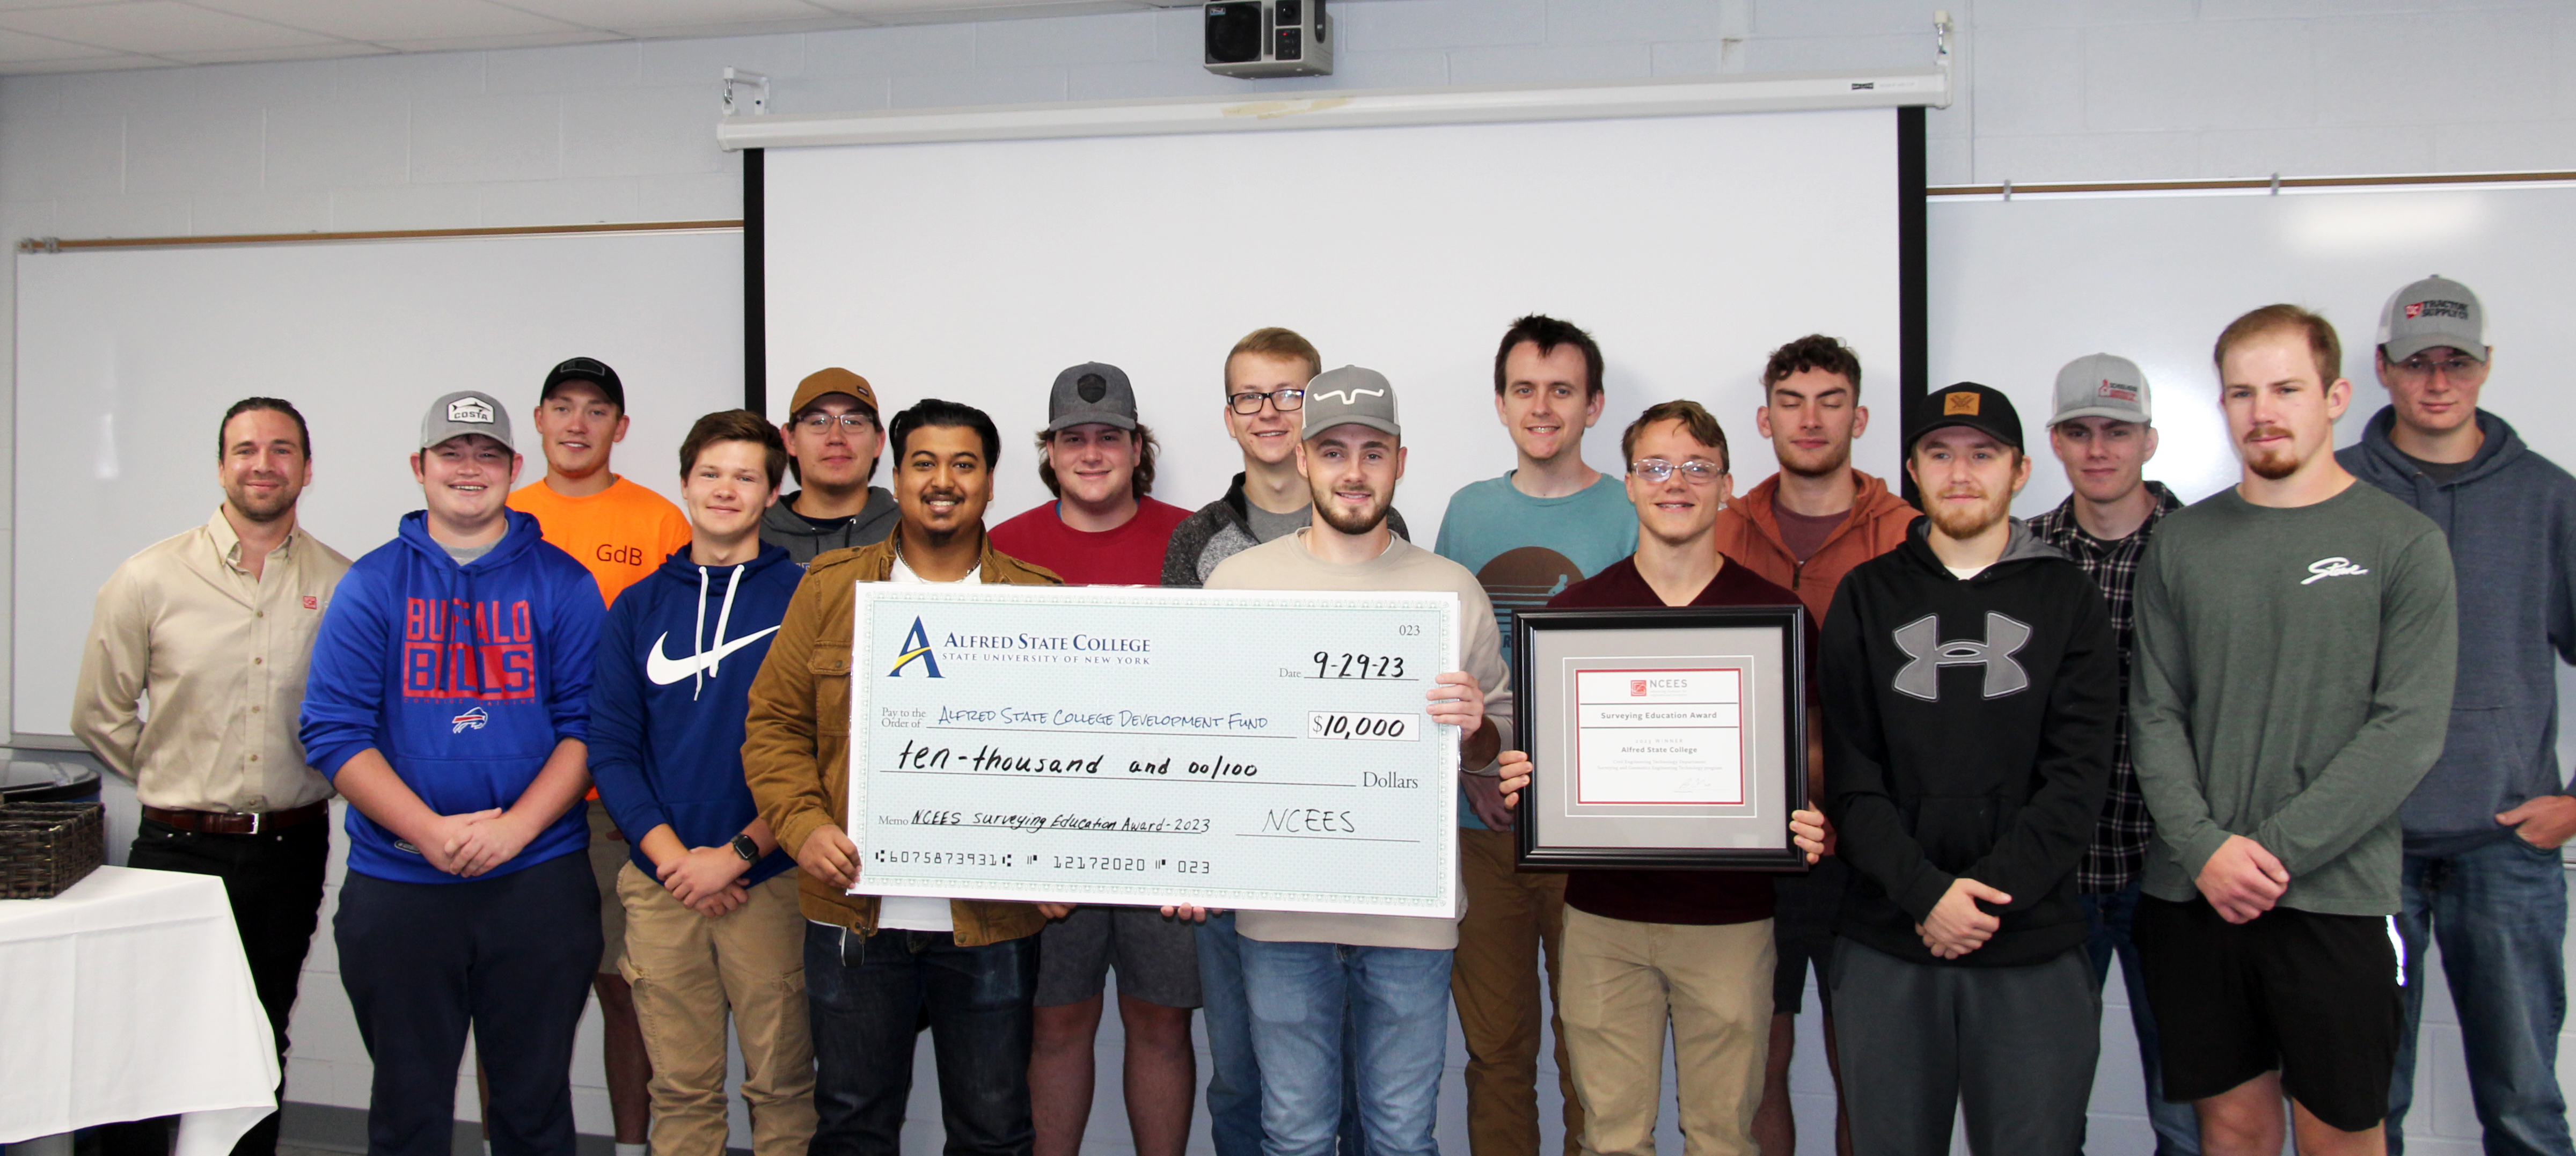 Students in the surveying and geomatics engineering program pose with the check and plaque.